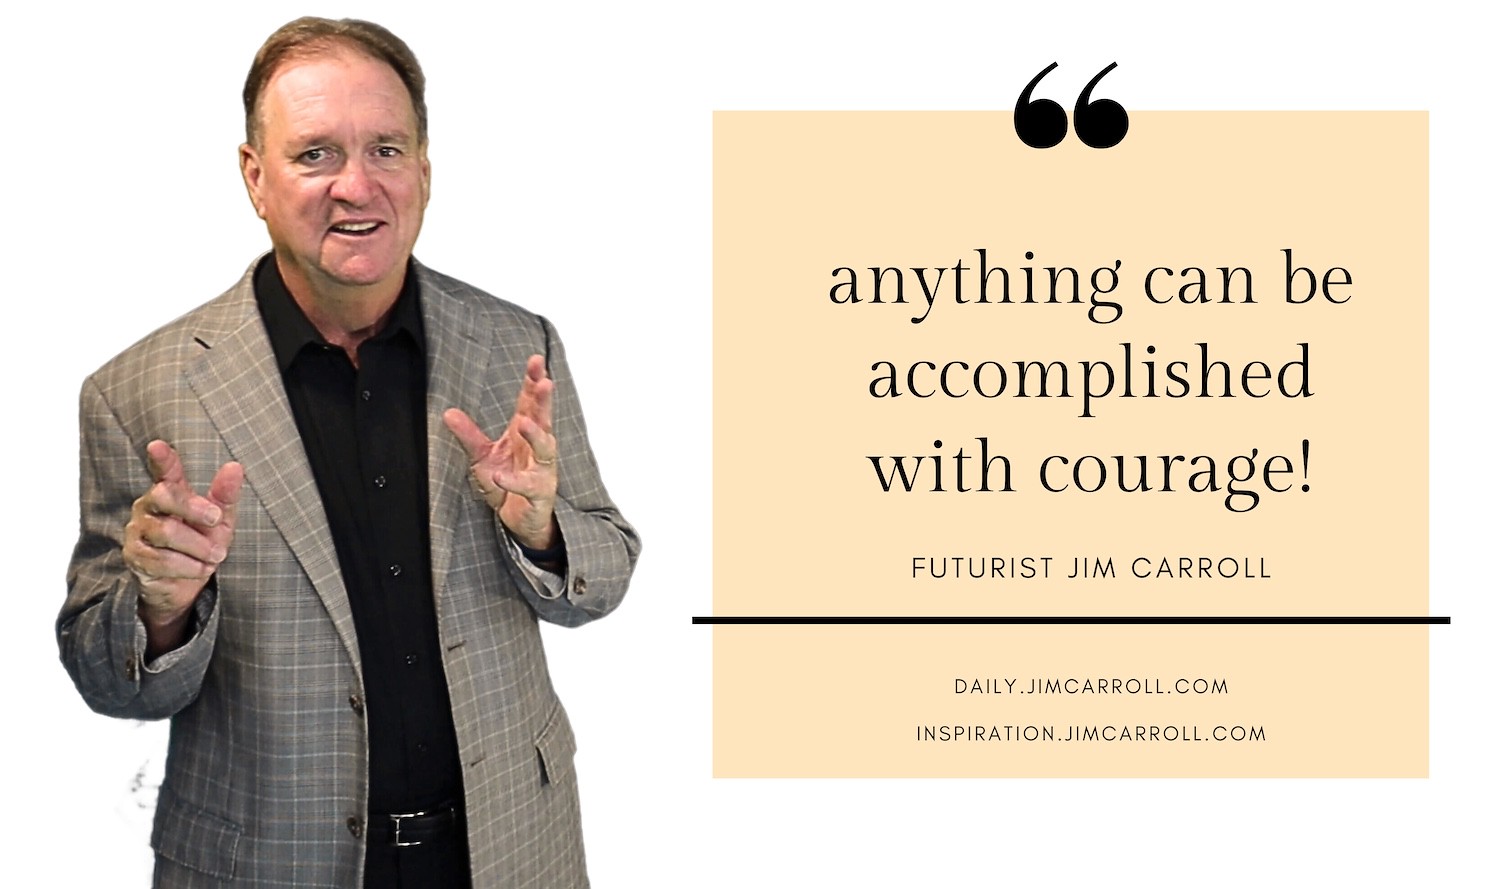 "Anything can be accomplished with courage!" - Futurist Jim Carroll